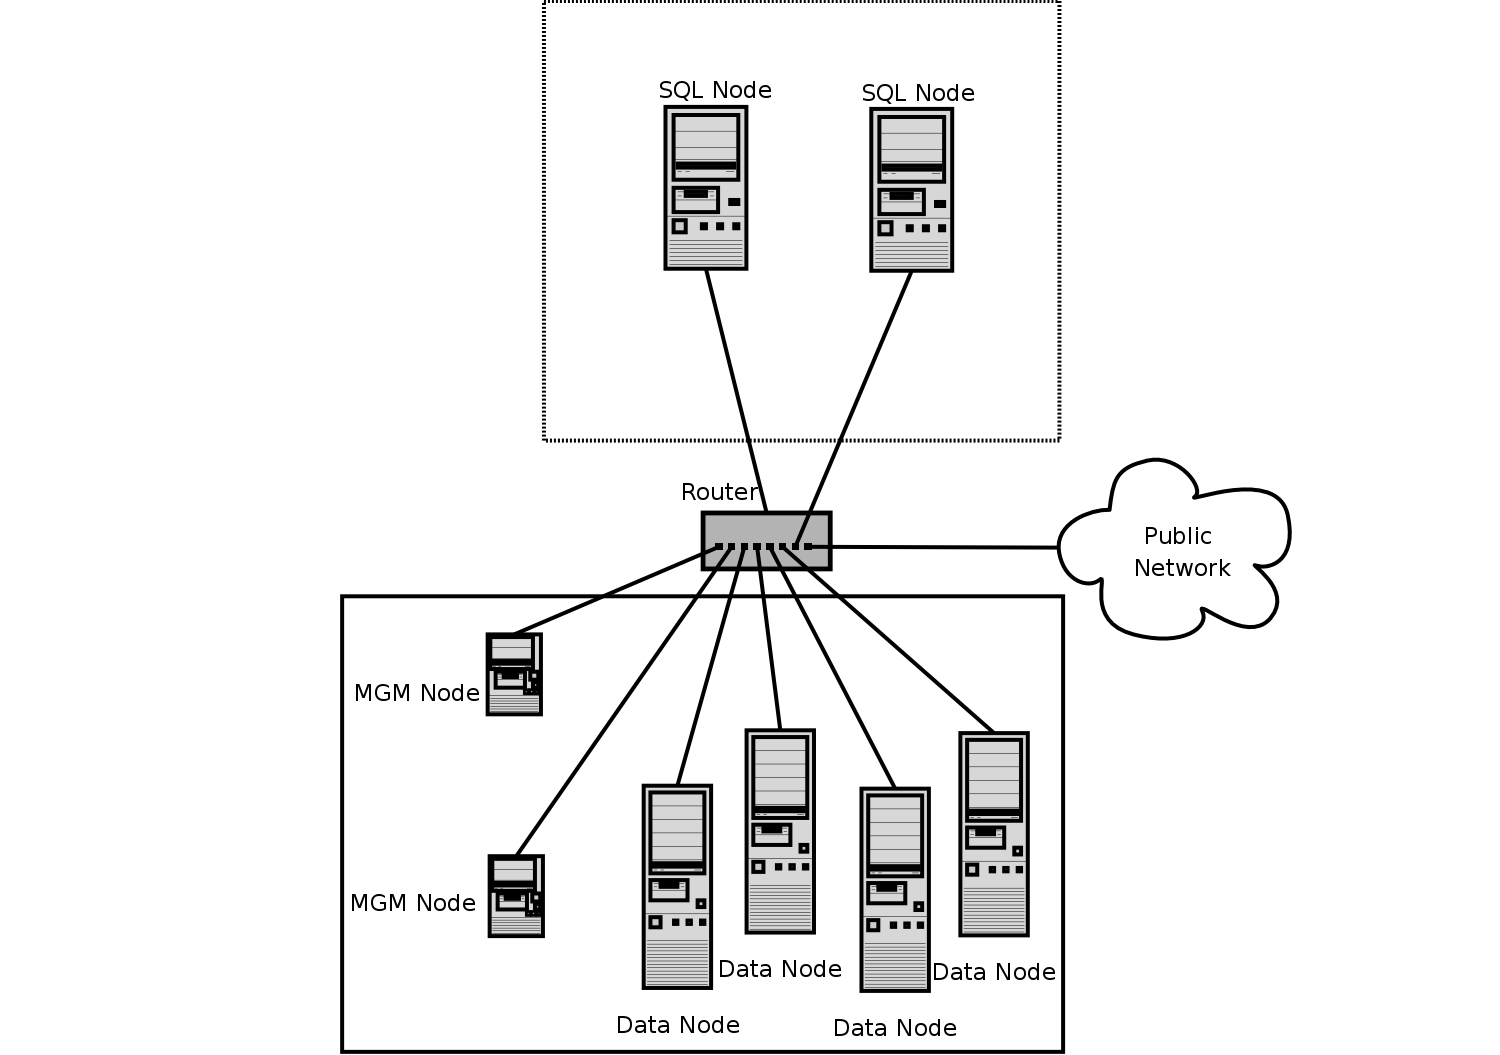 MySQL Cluster deployed on a network
                using software firewalls to create public and private
                zones